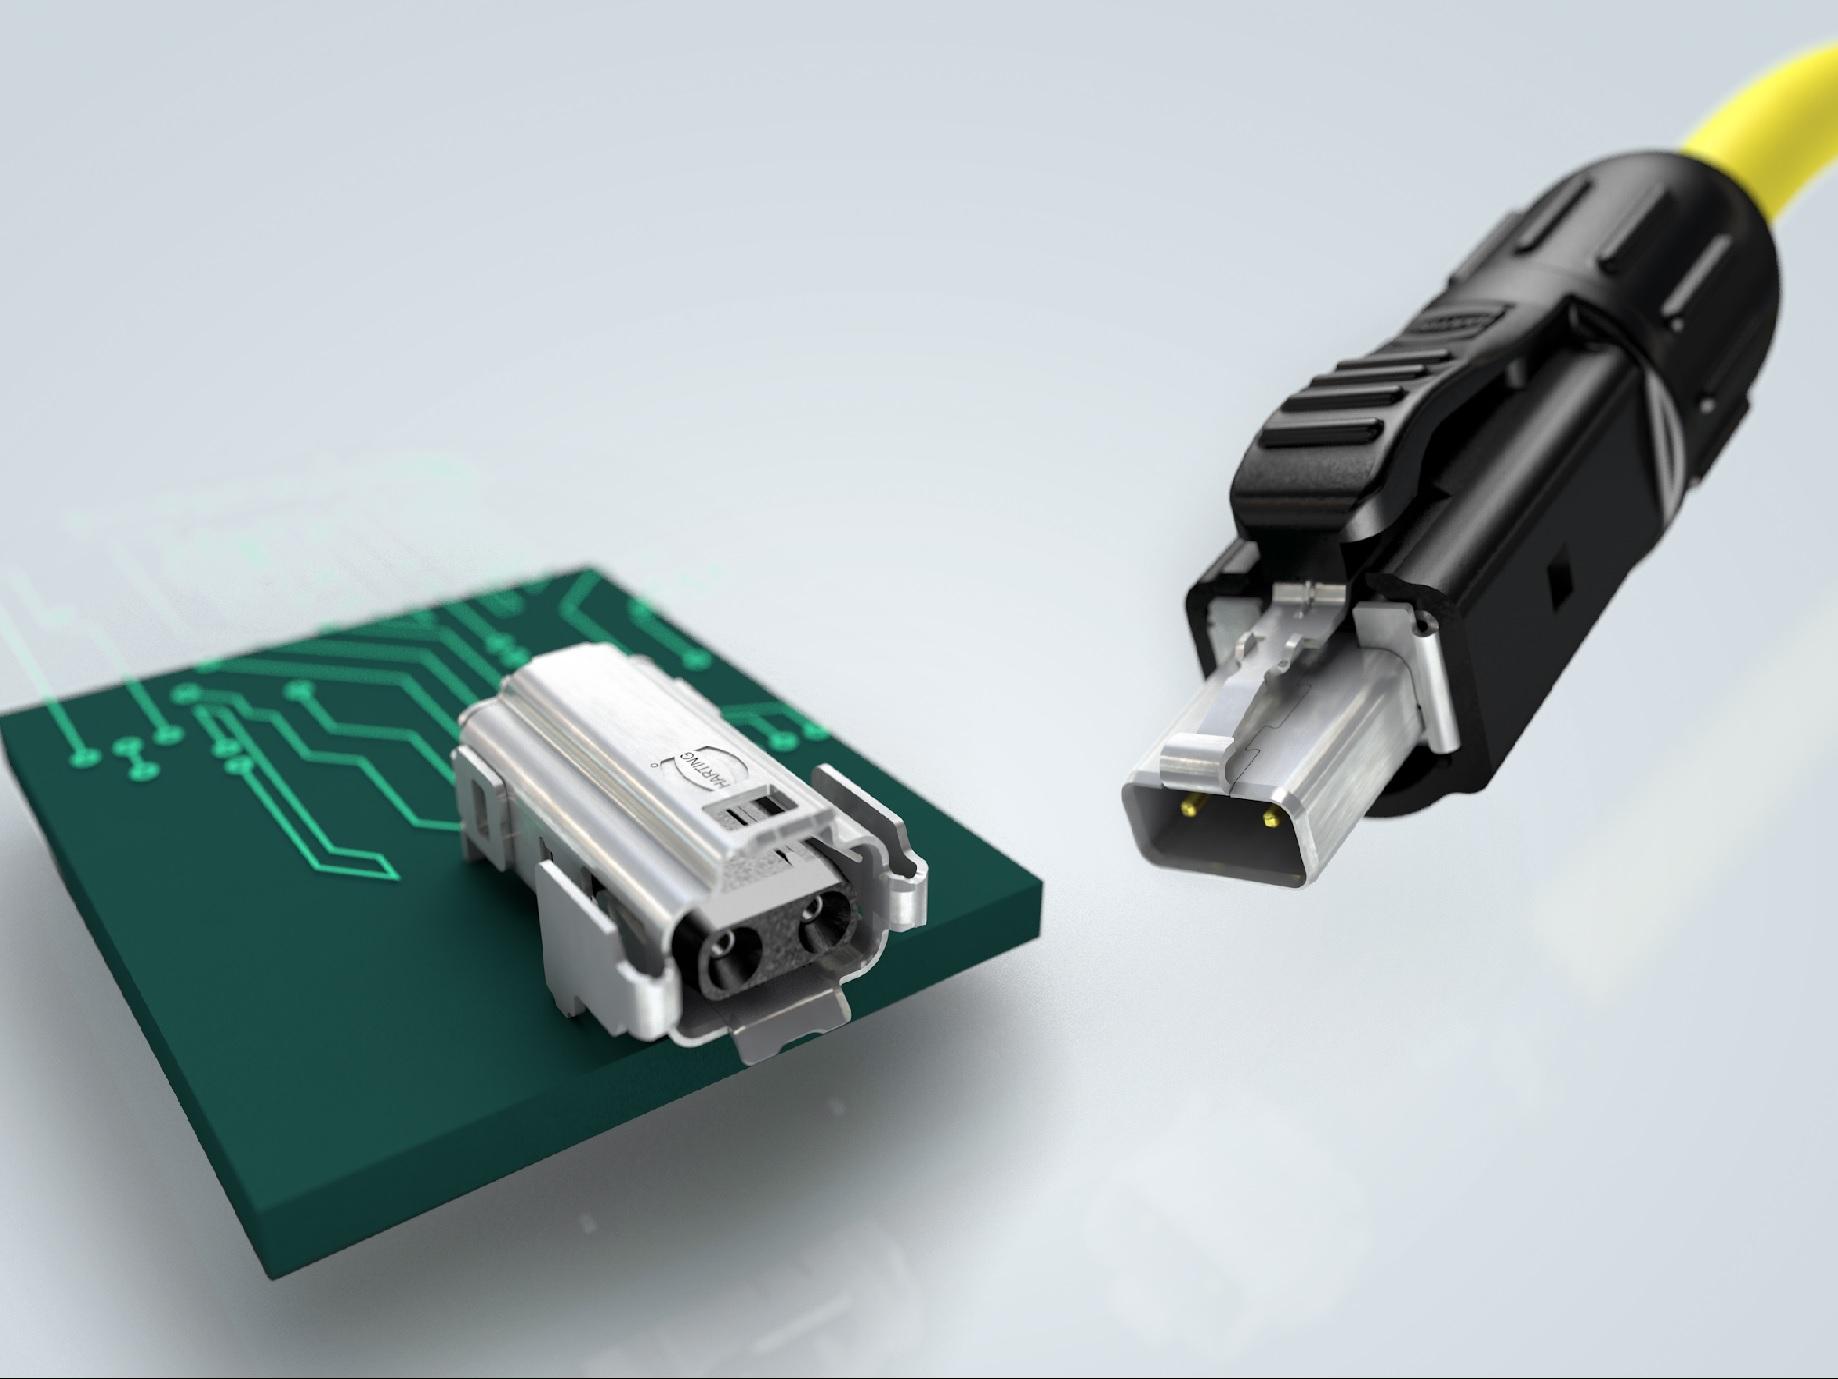 New innovations on show at HARTING's Industrial Ethernet Week